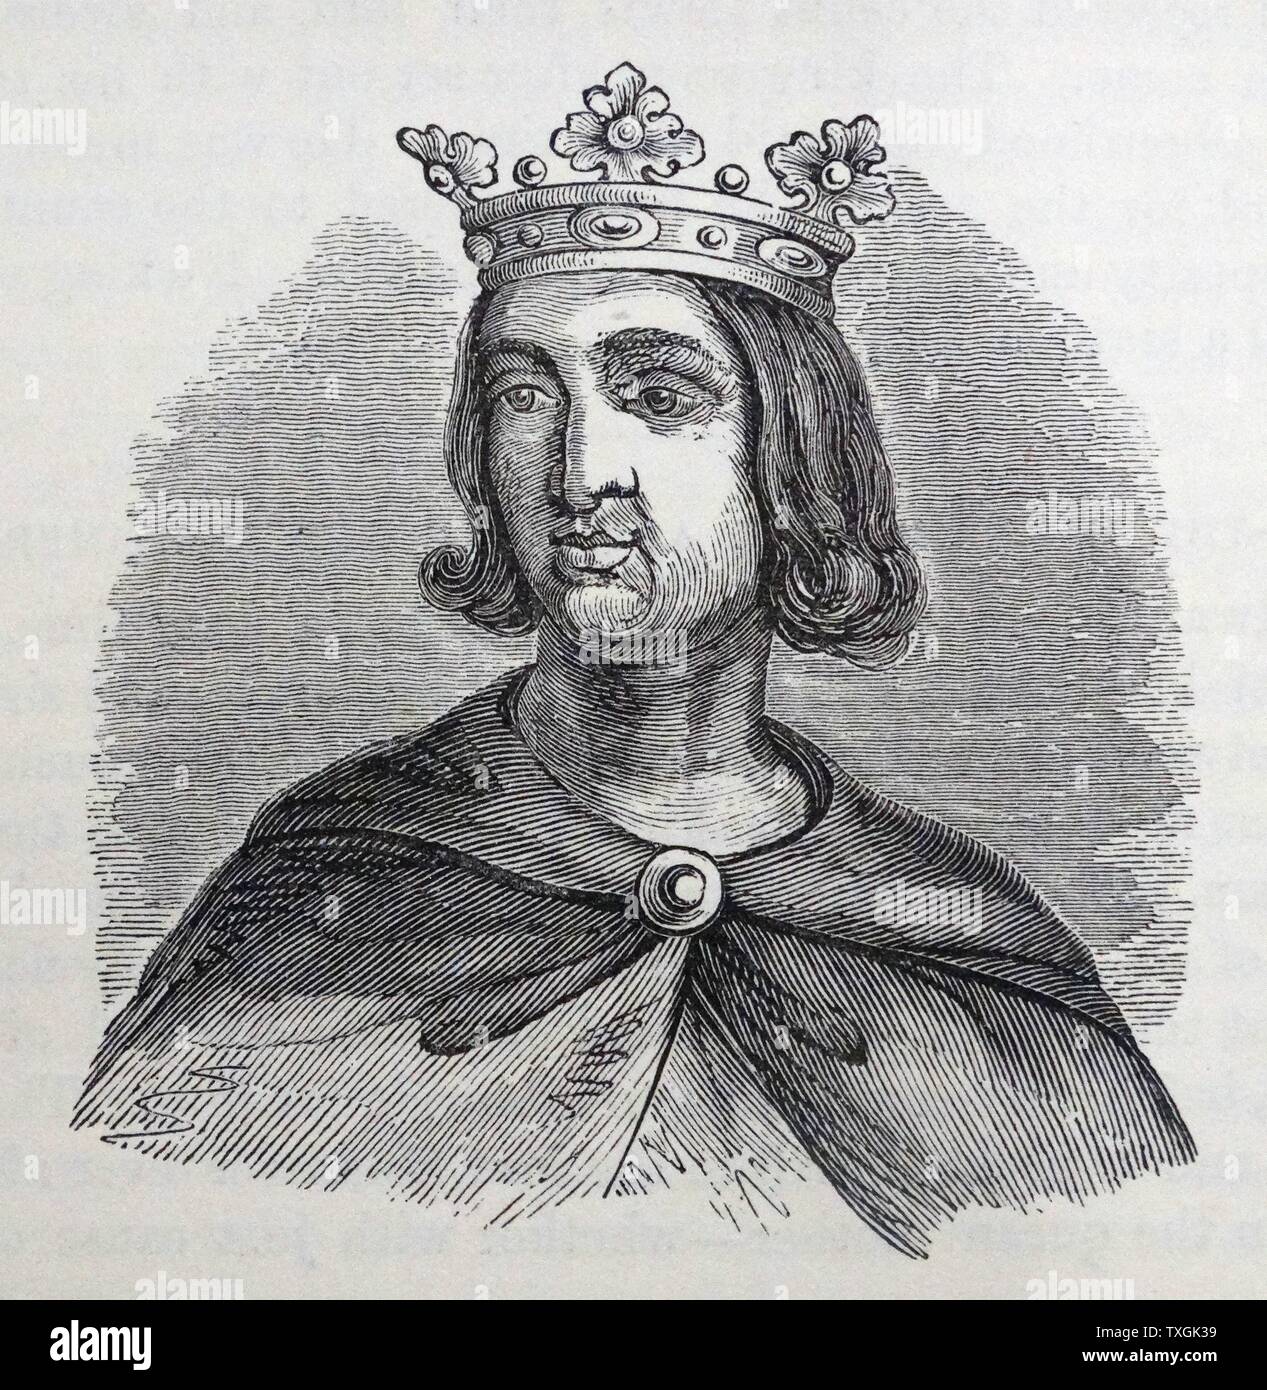 Portrait of Philip VI of France (1293-1350) the first King of France from the House of Valois. Dated 14th Century Stock Photo